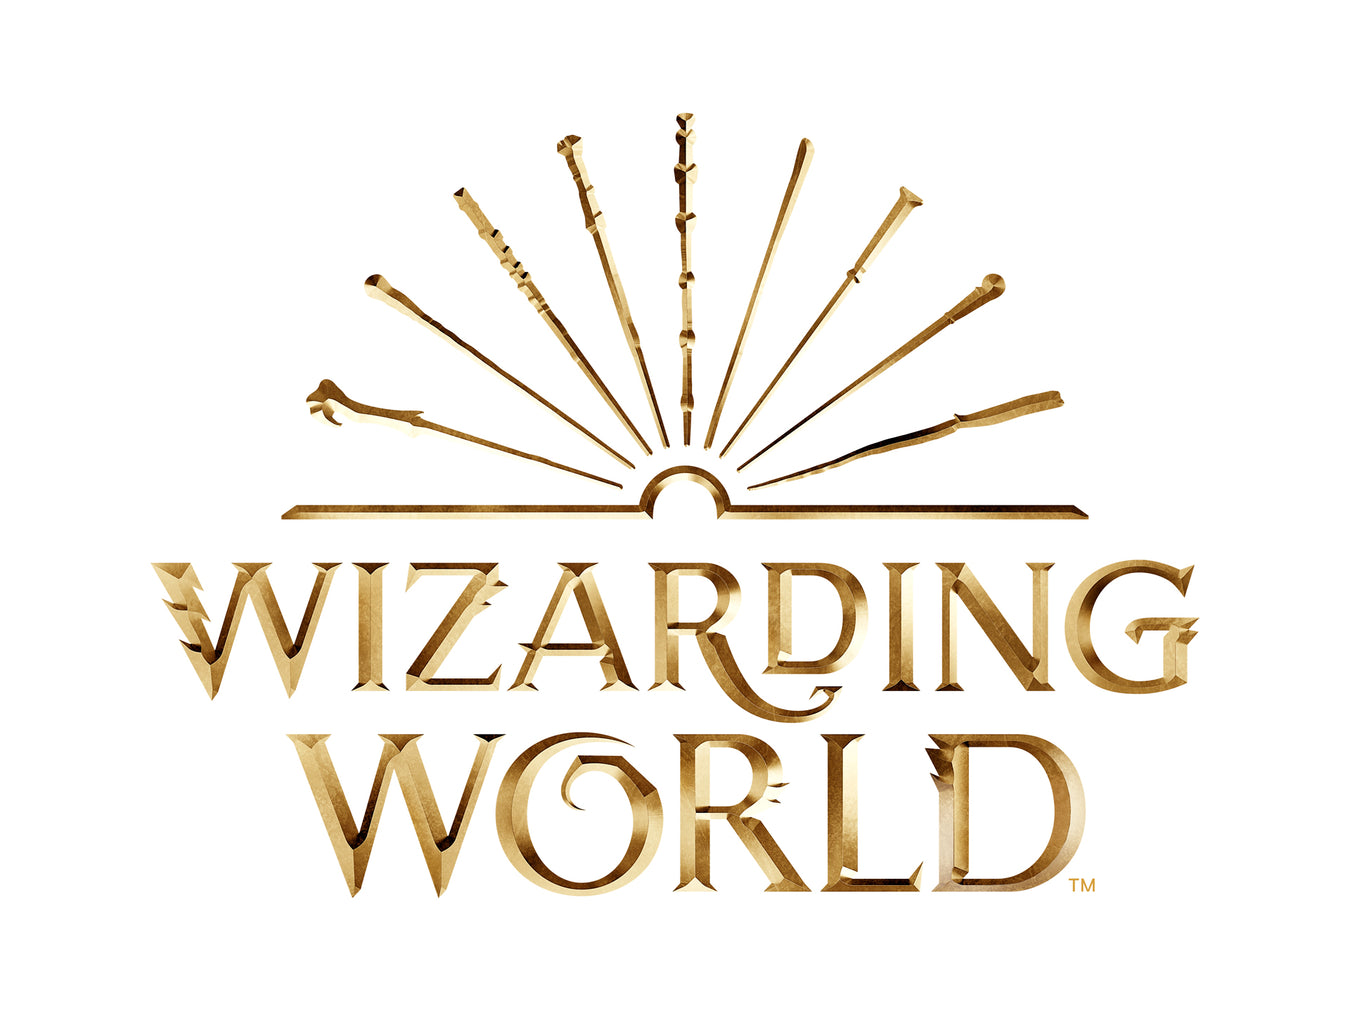 The Wizarding World of Harry Potter Collection